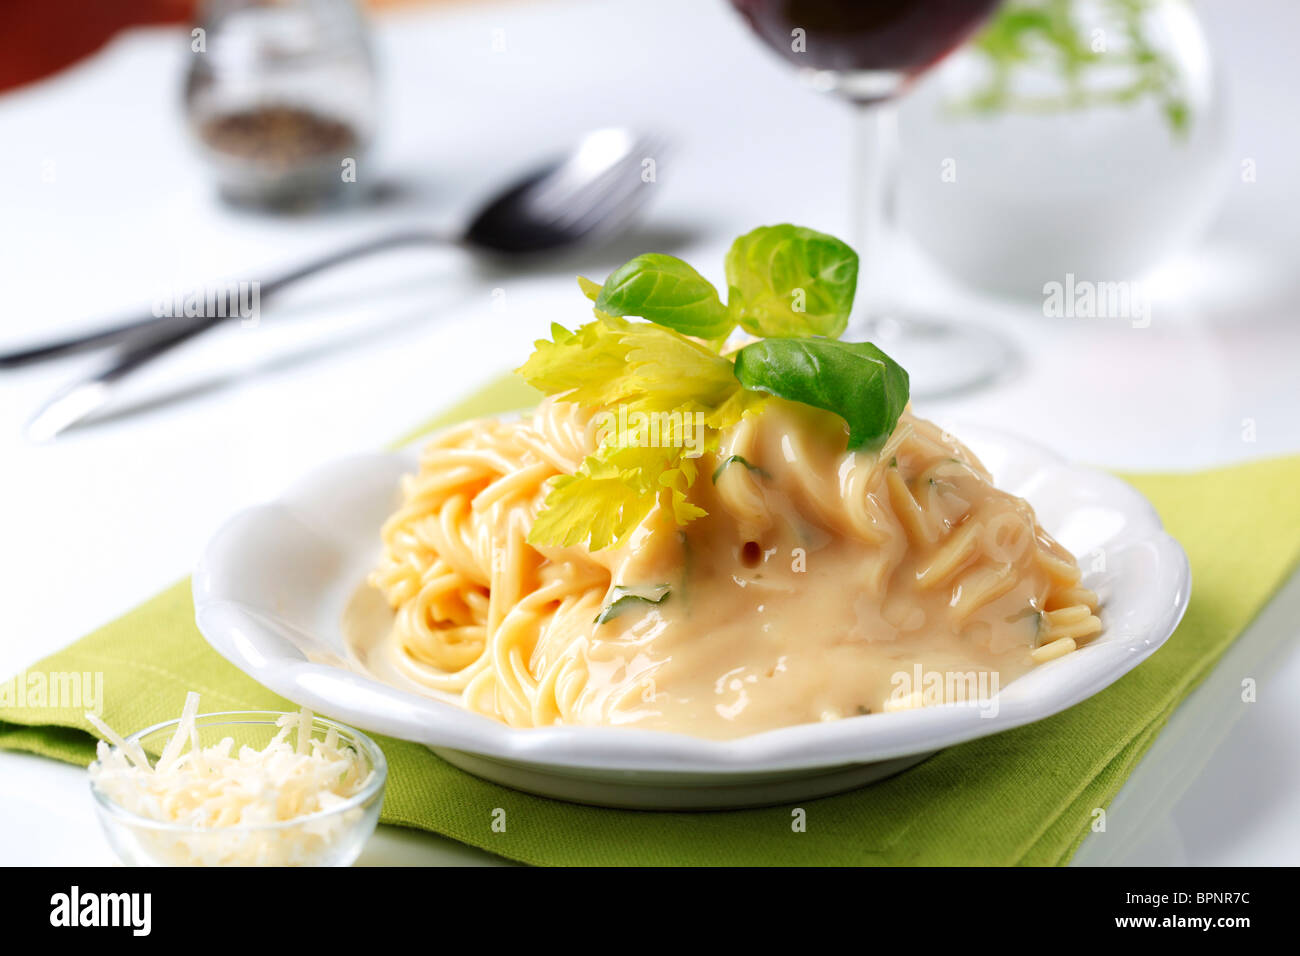 Portion of spaghetti with cheese sauce Stock Photo